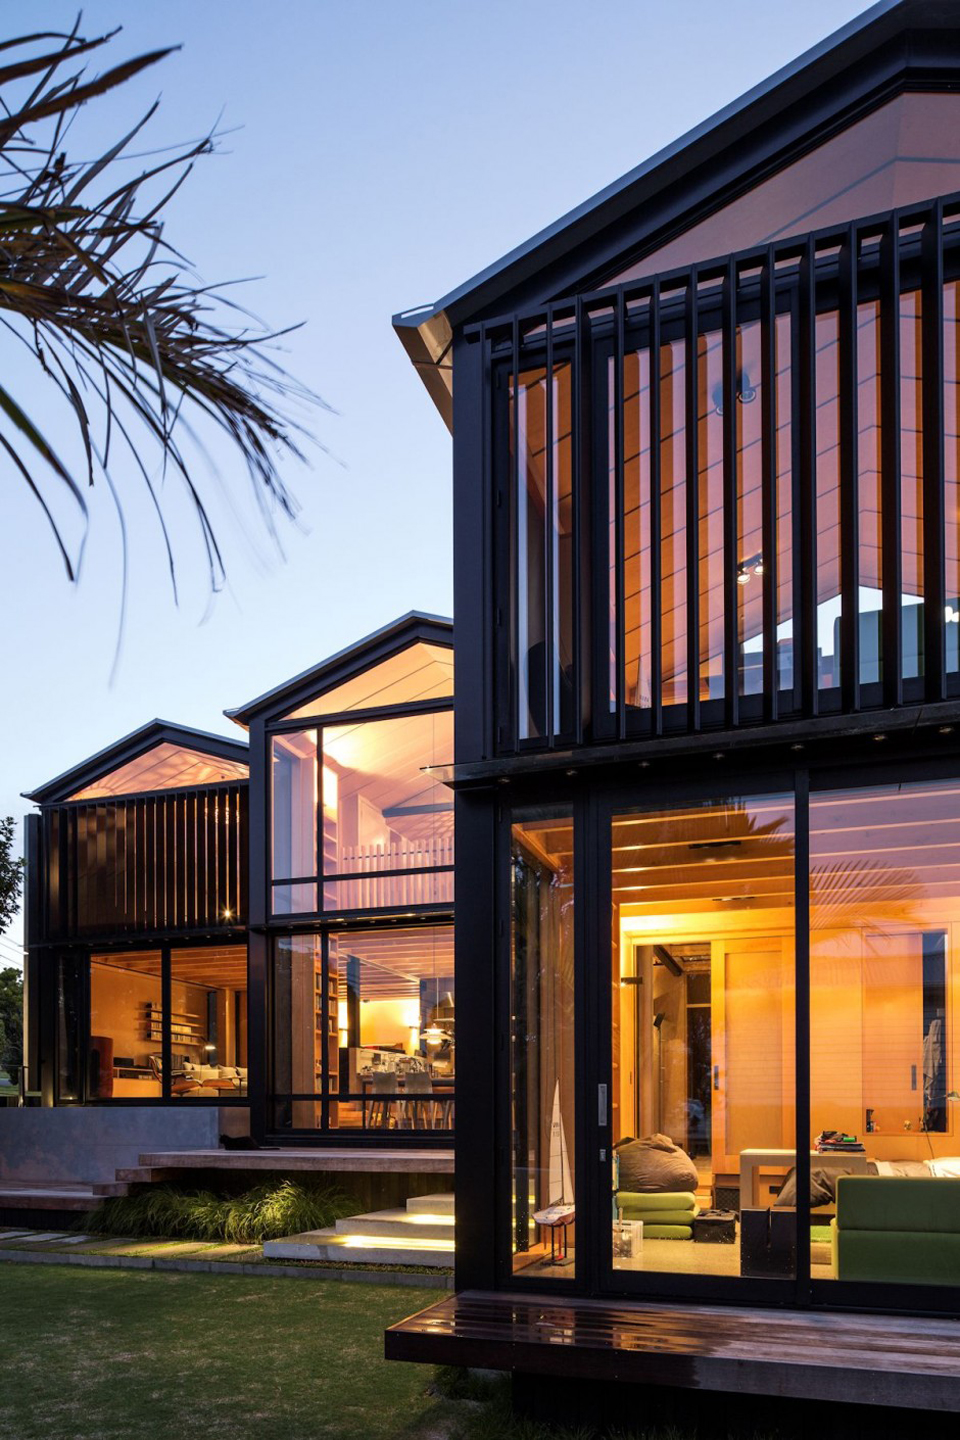 boatsheds-by-strachan-group-architects-and-rachael-rush-4